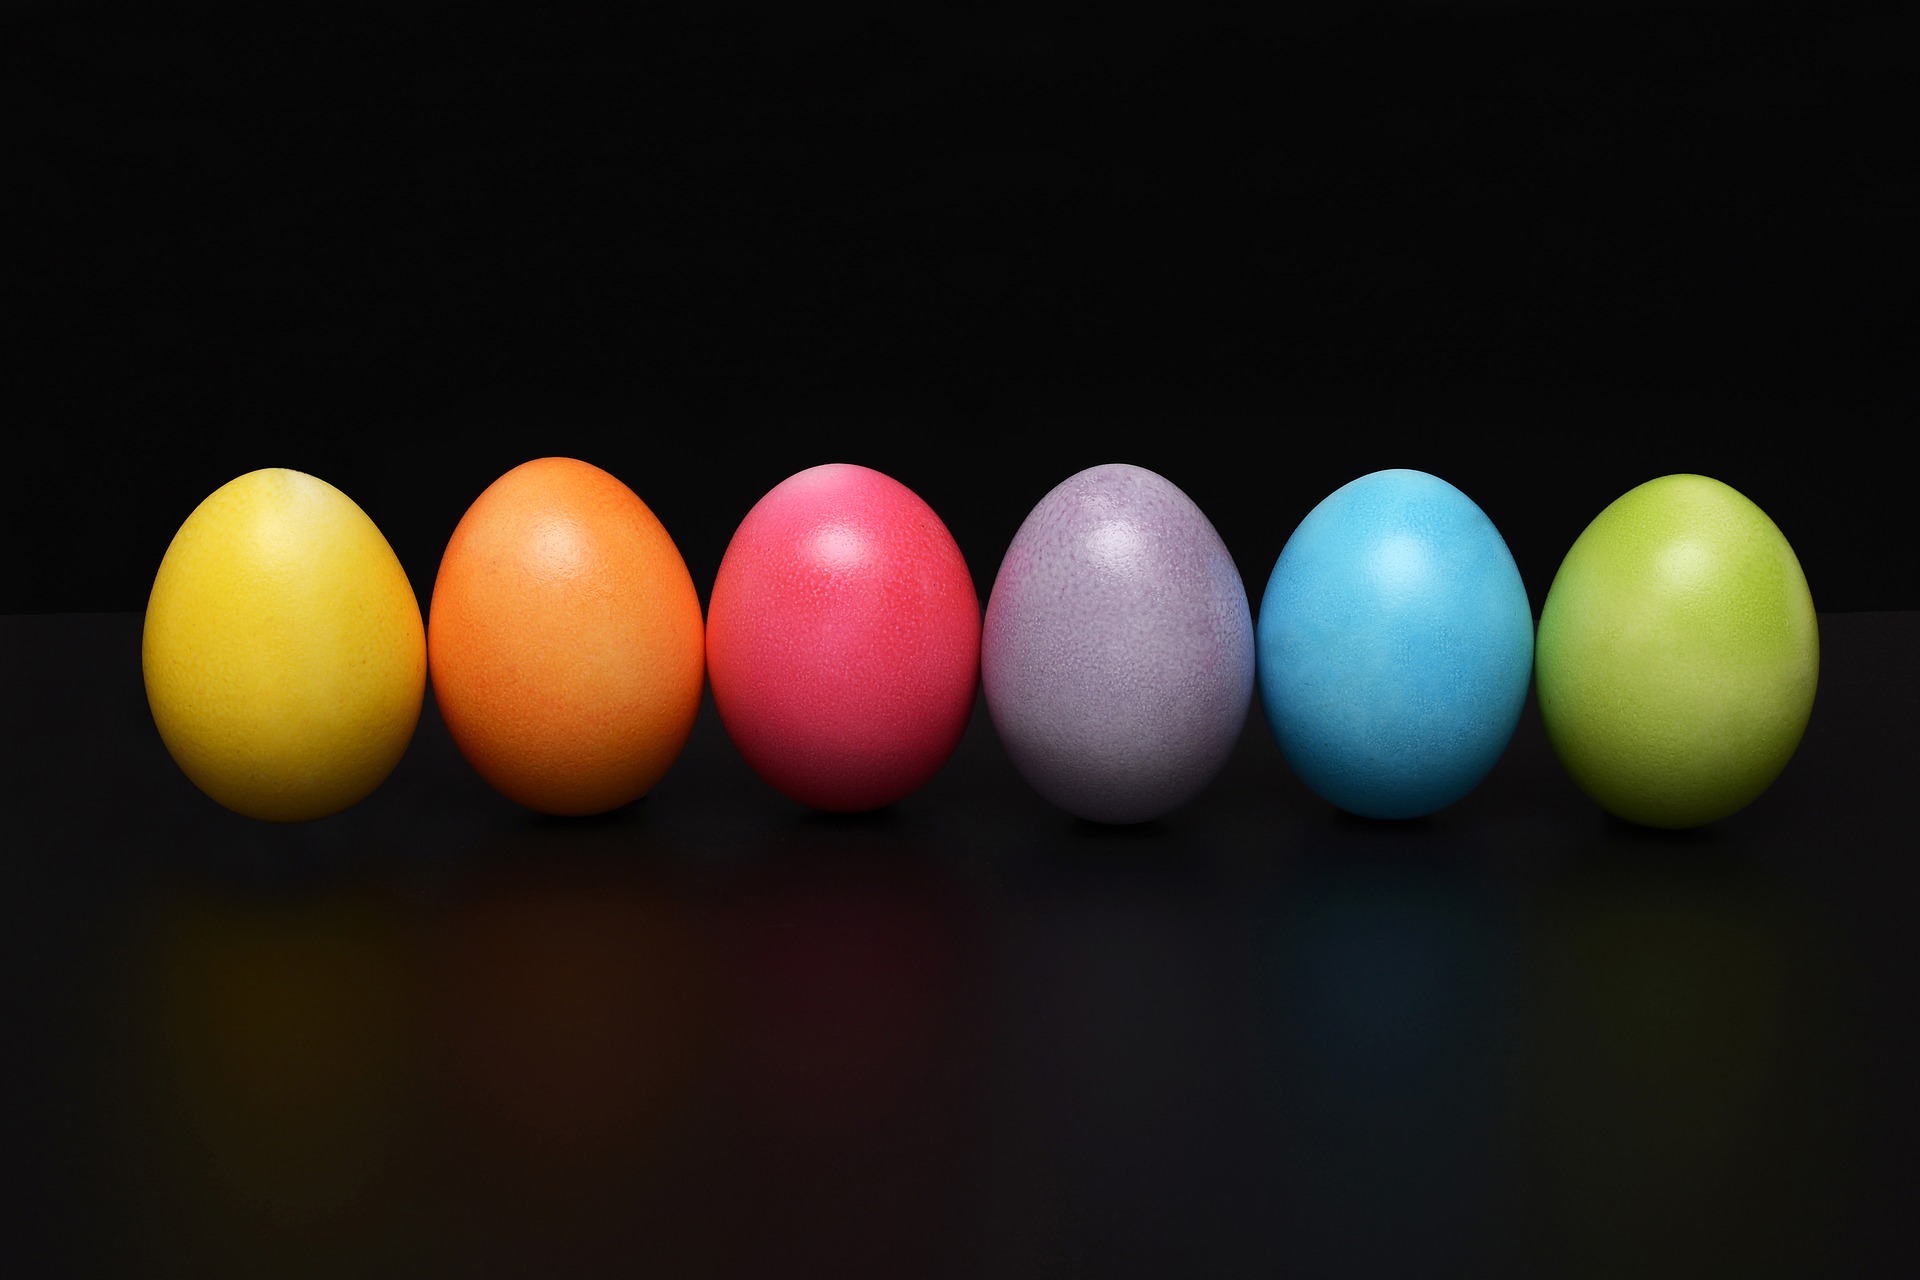 easter egg multicolour eggs psychological disorder impact eating habits festivities challenging